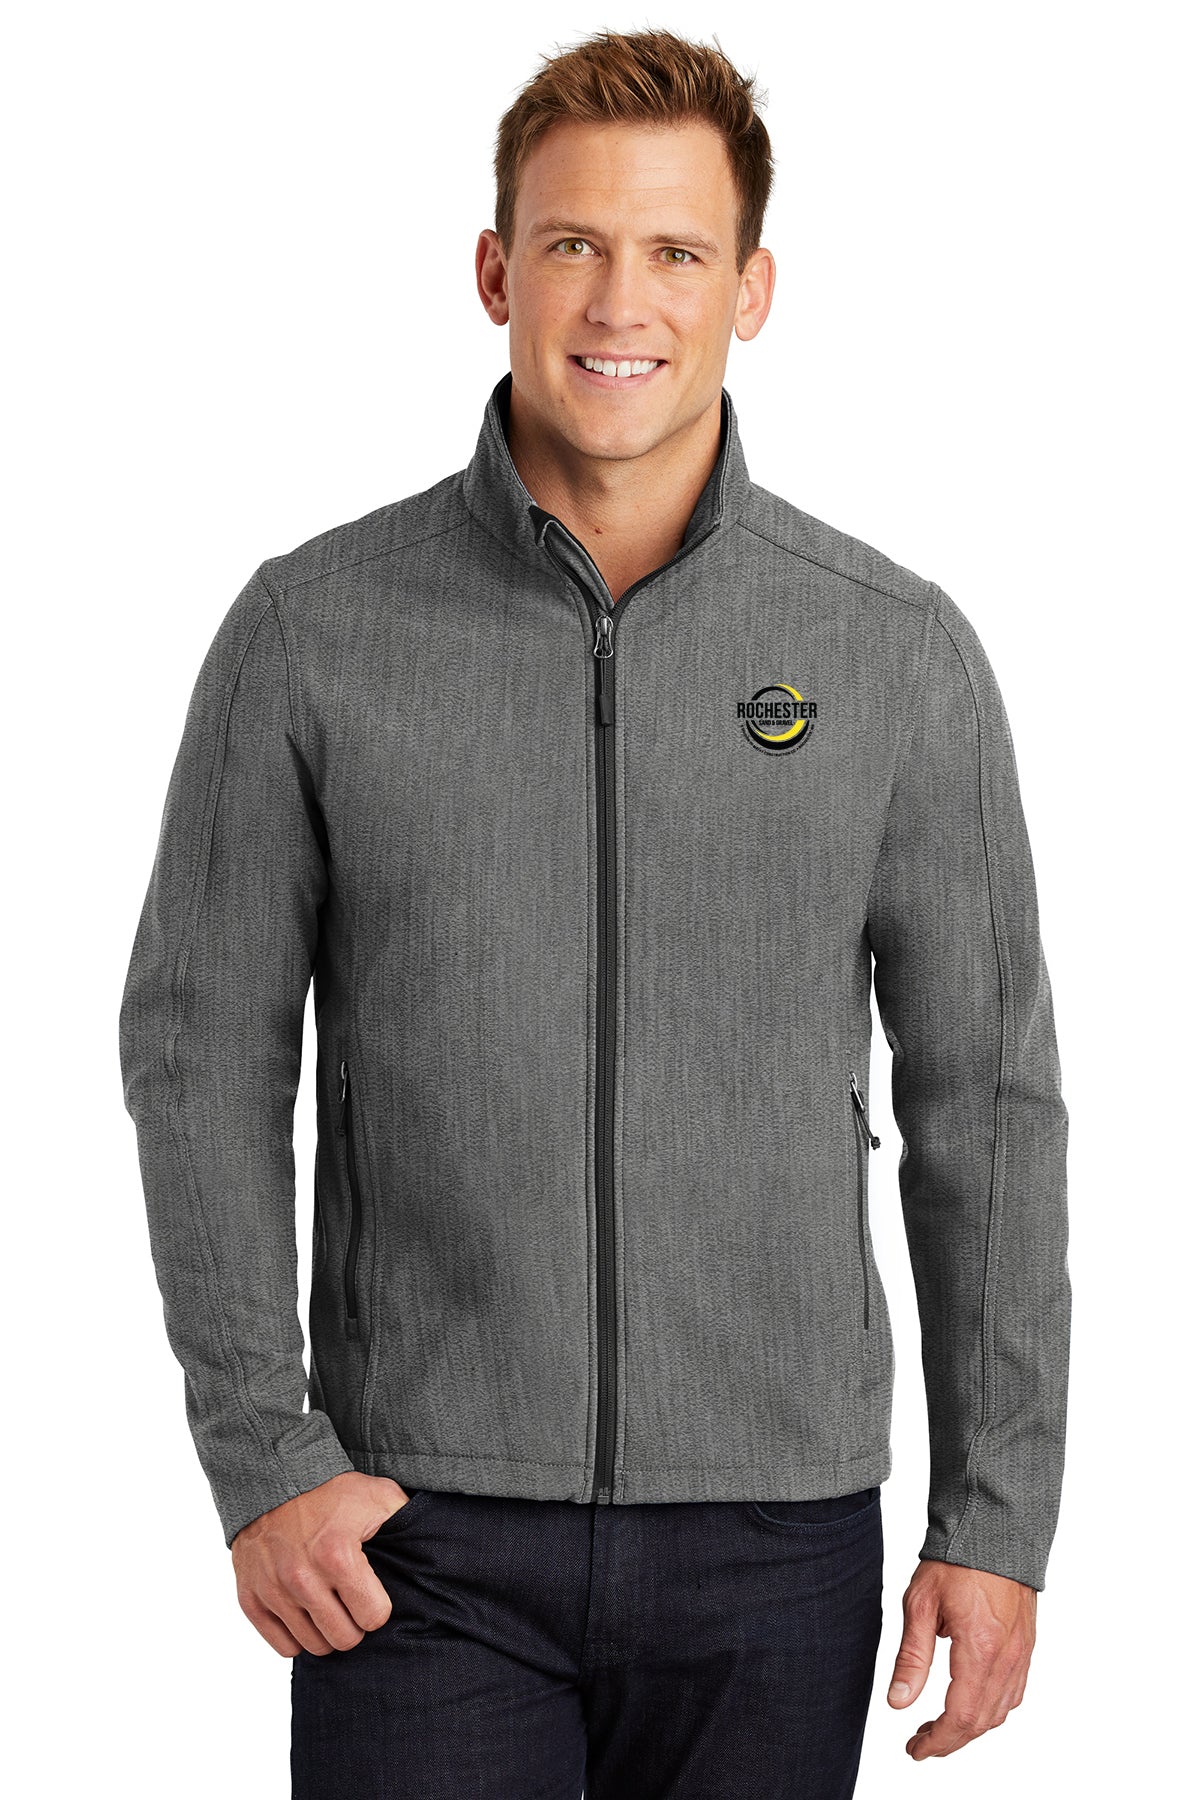 Rochester Sand and Gravel Soft Shell Jacket